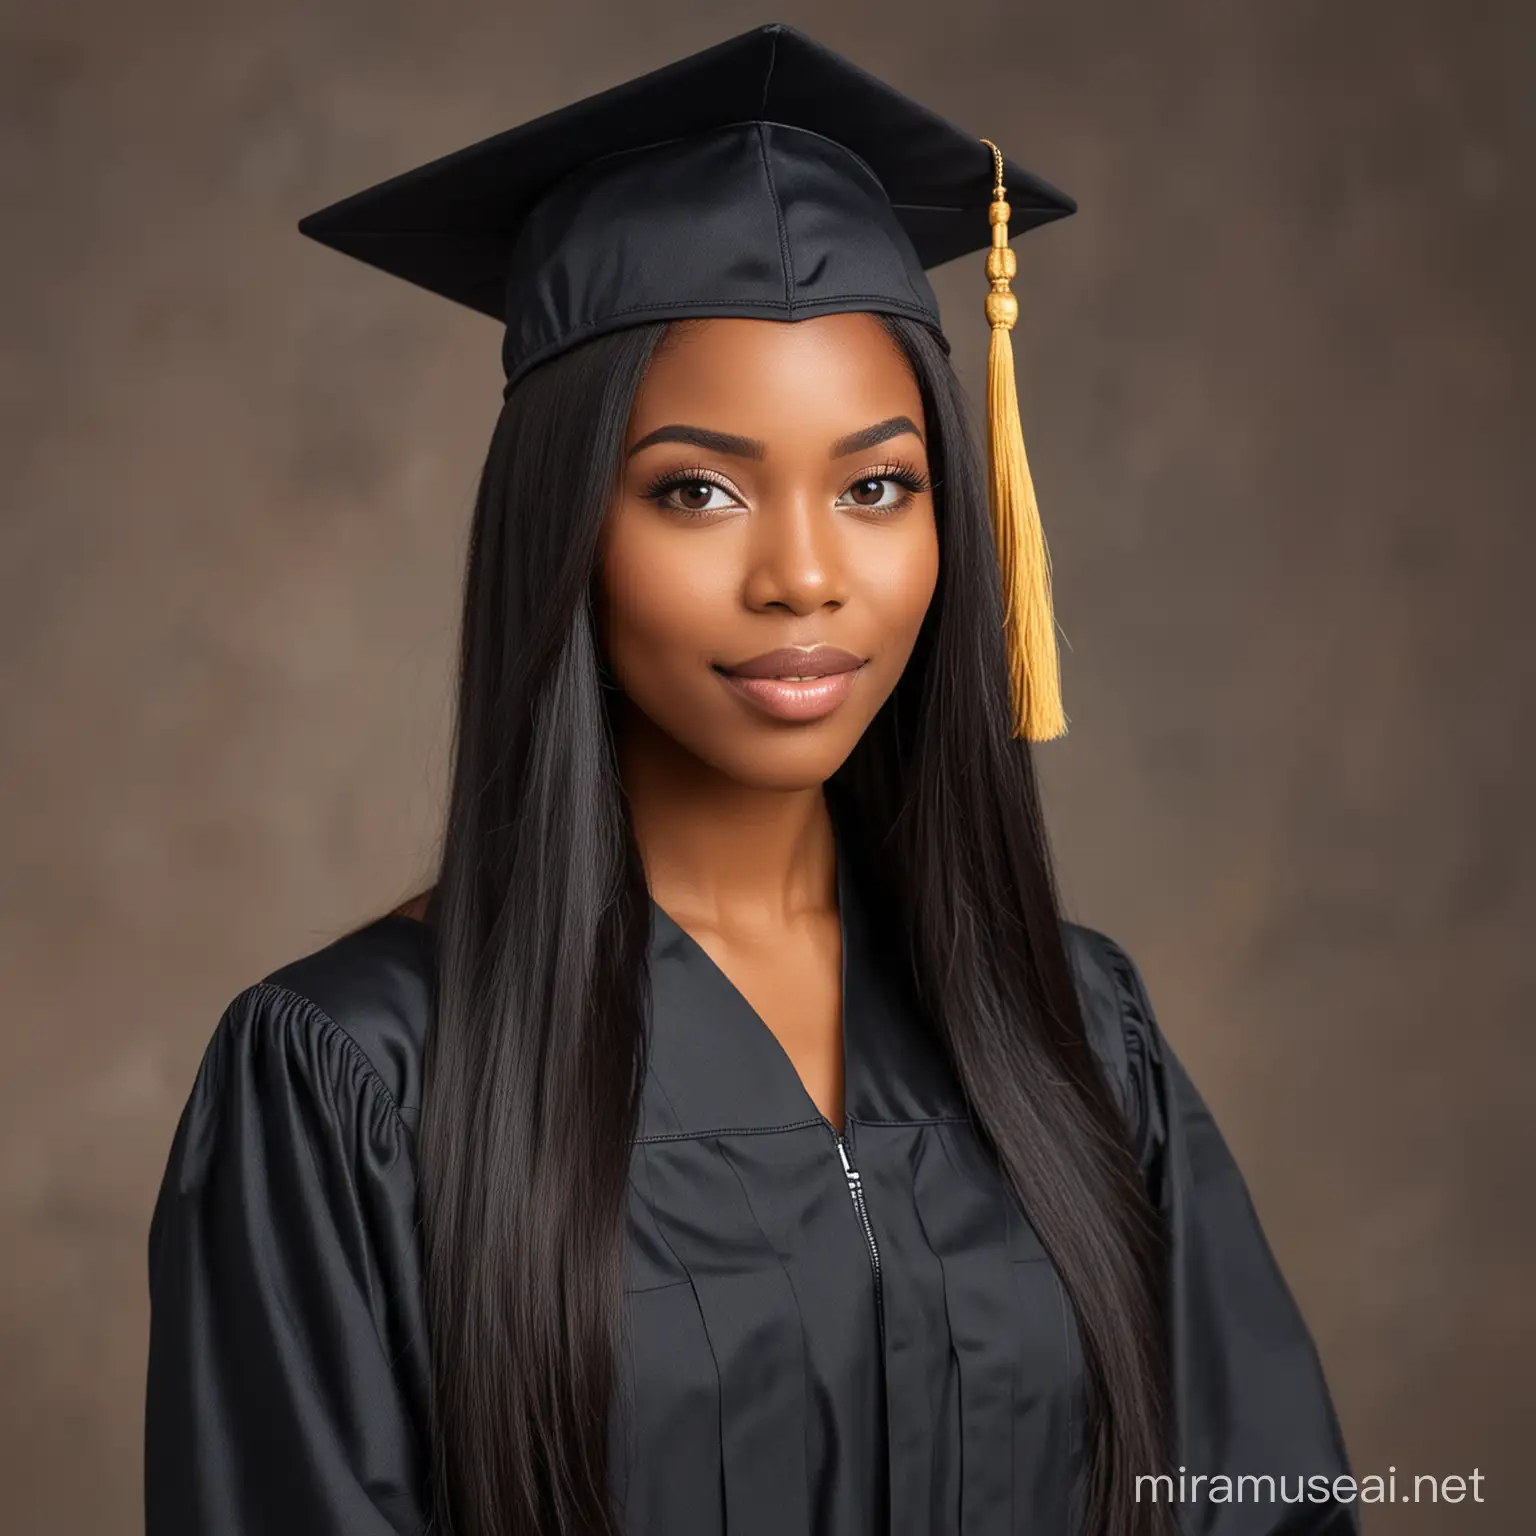 Elegant African American Woman with Long Straight Black Hair and Radiant Complexion
 graduates with cap and gowns